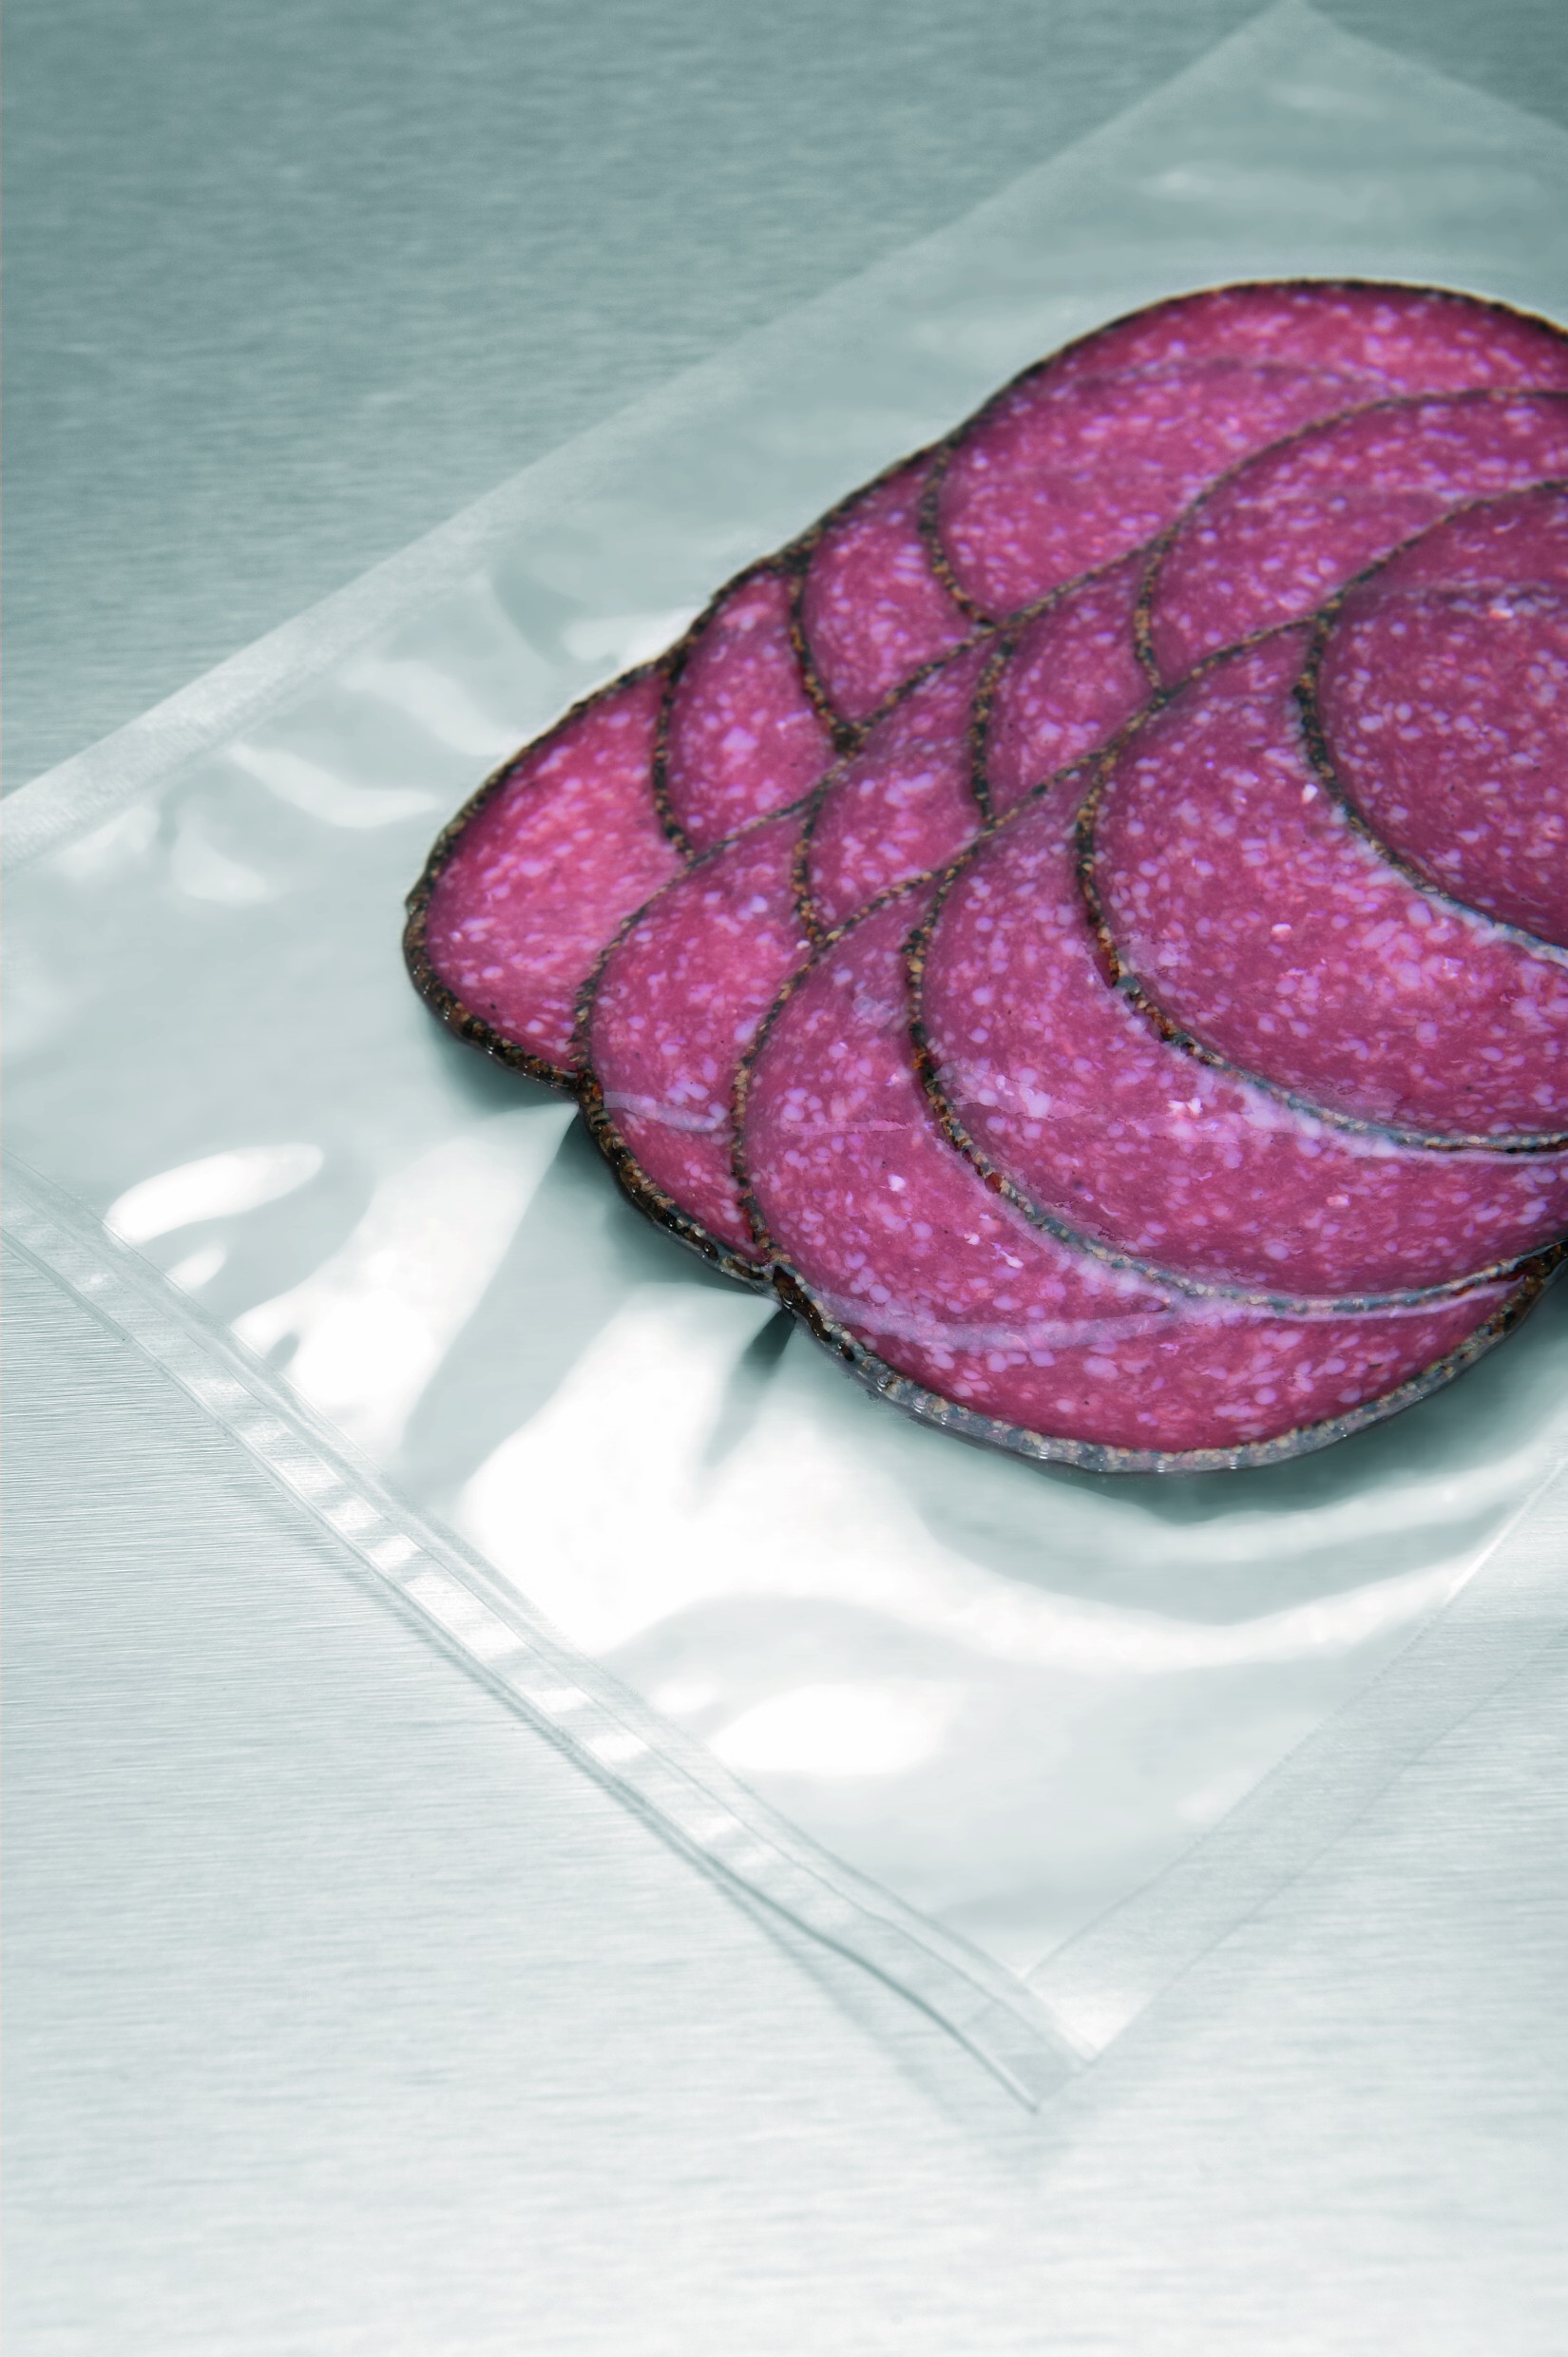 Multivac_Sliced_sausage_in_pouch